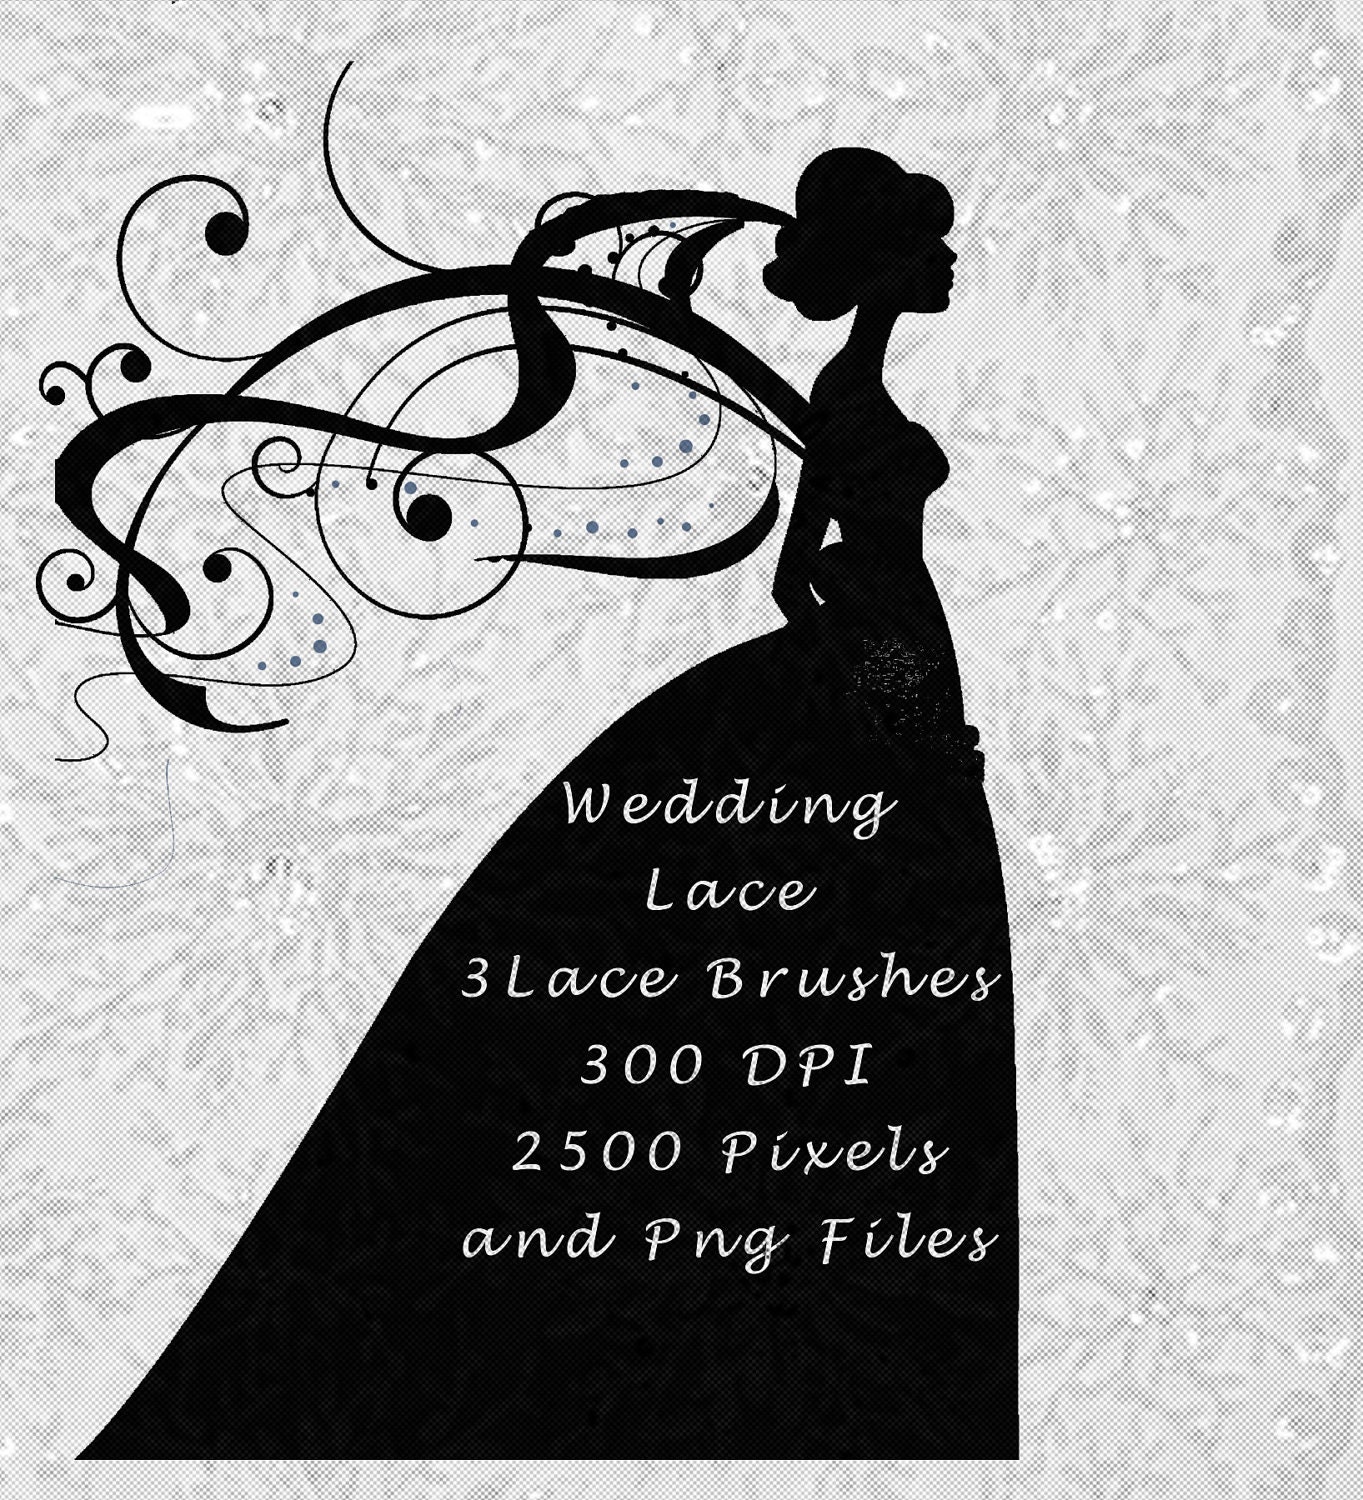 free wedding lace clipart - photo #9